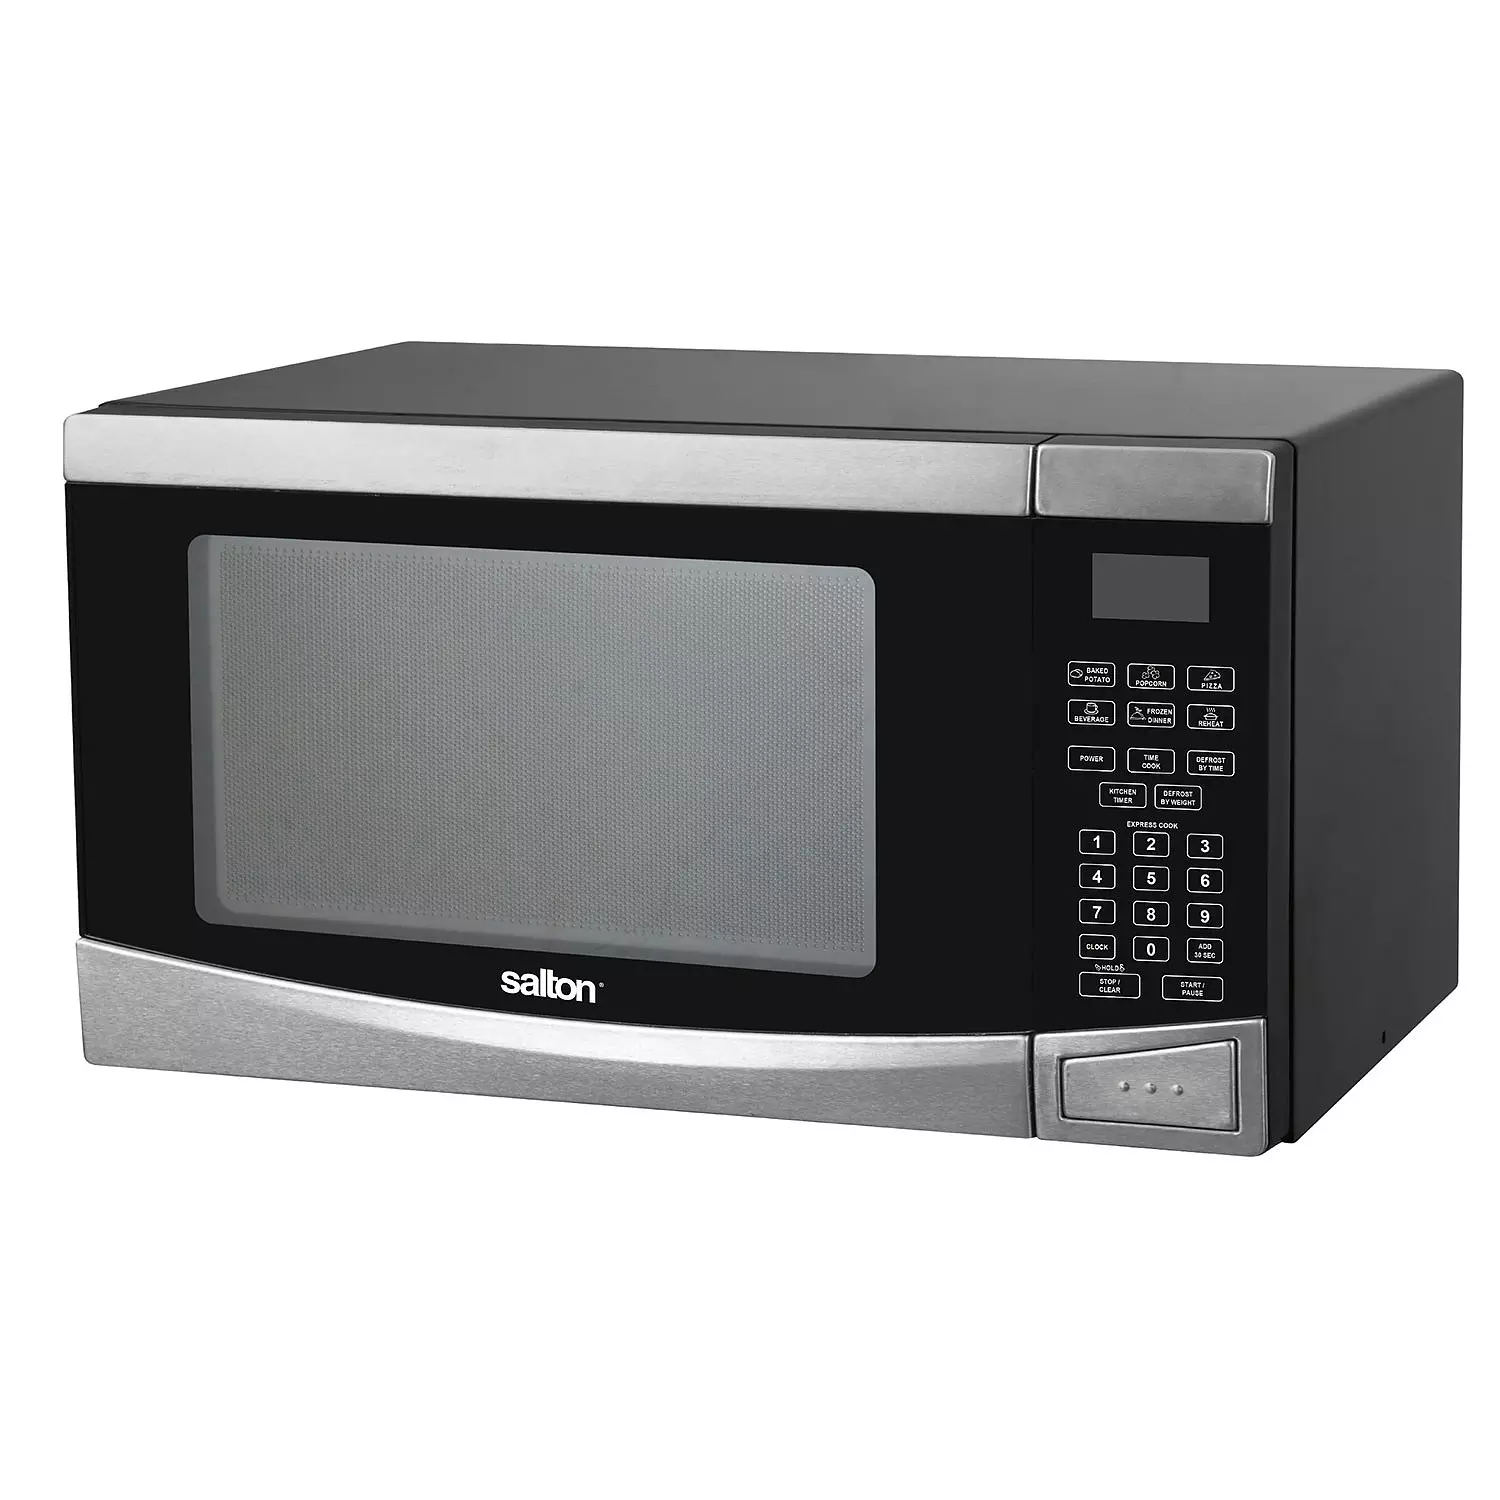 Salton - Microwave oven, 0.9 cu Ft, stainless steel